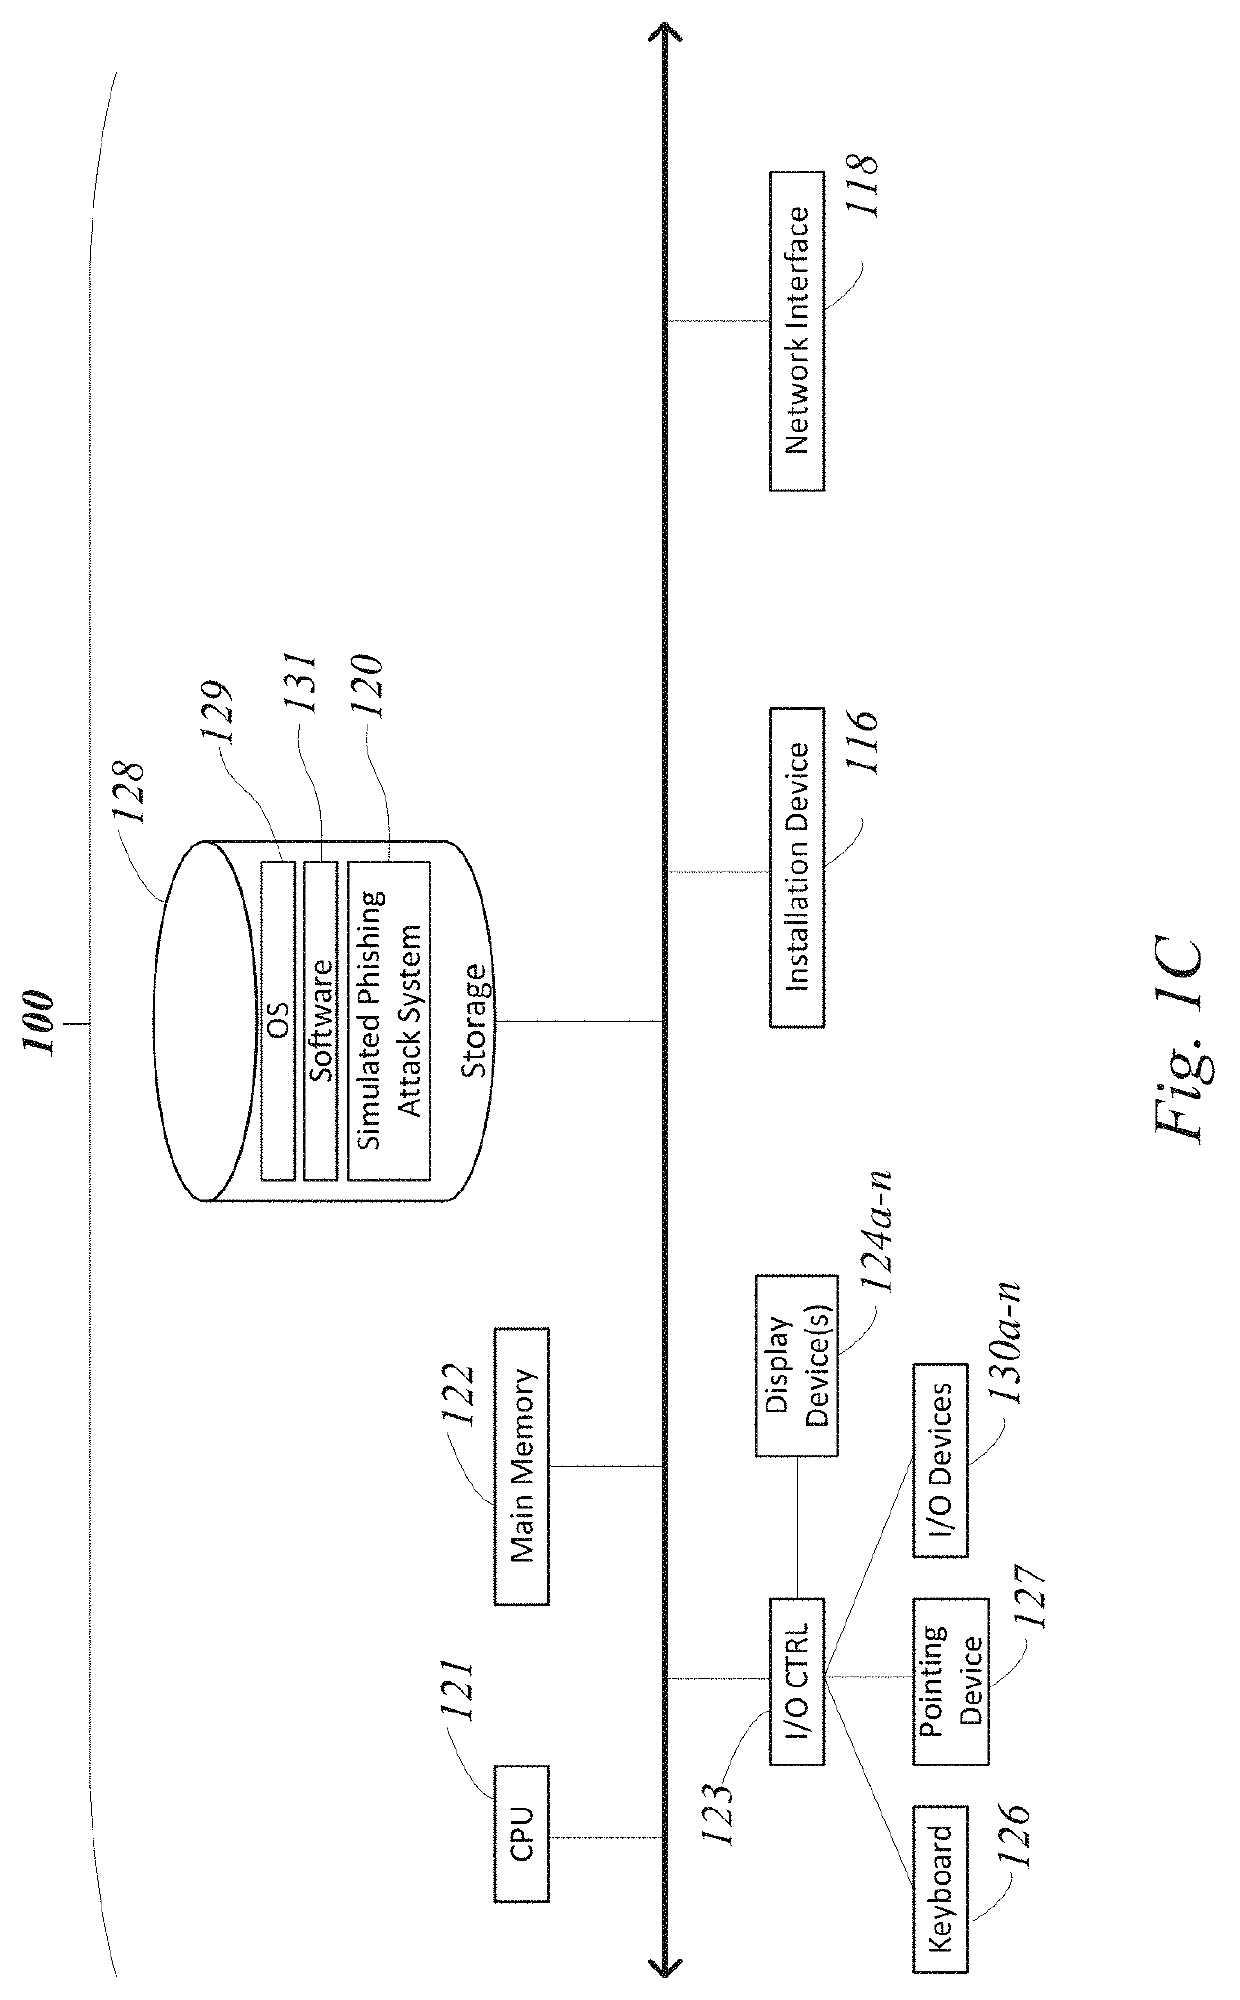 Systems and methods for determining individual and group risk scores